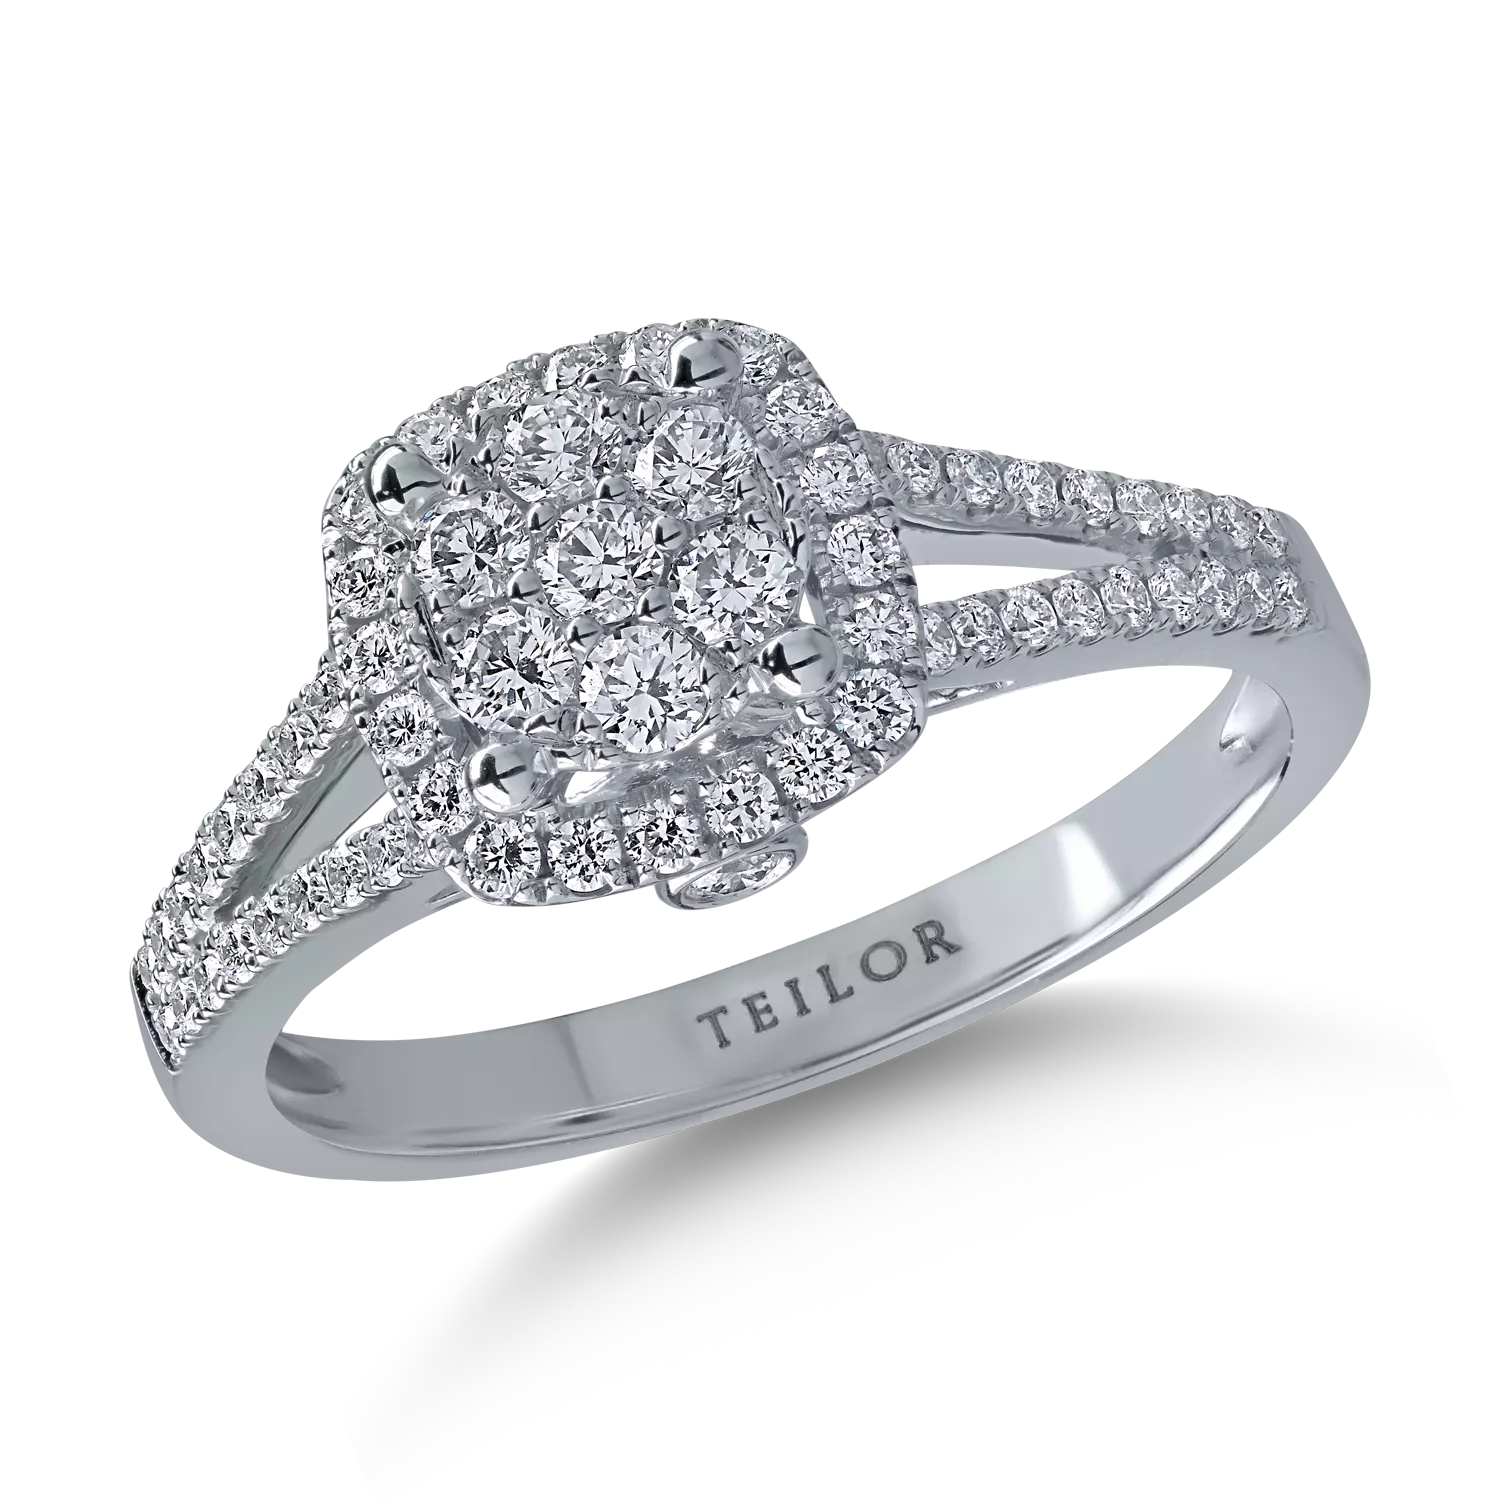 White gold engagement ring with 0.52ct diamonds